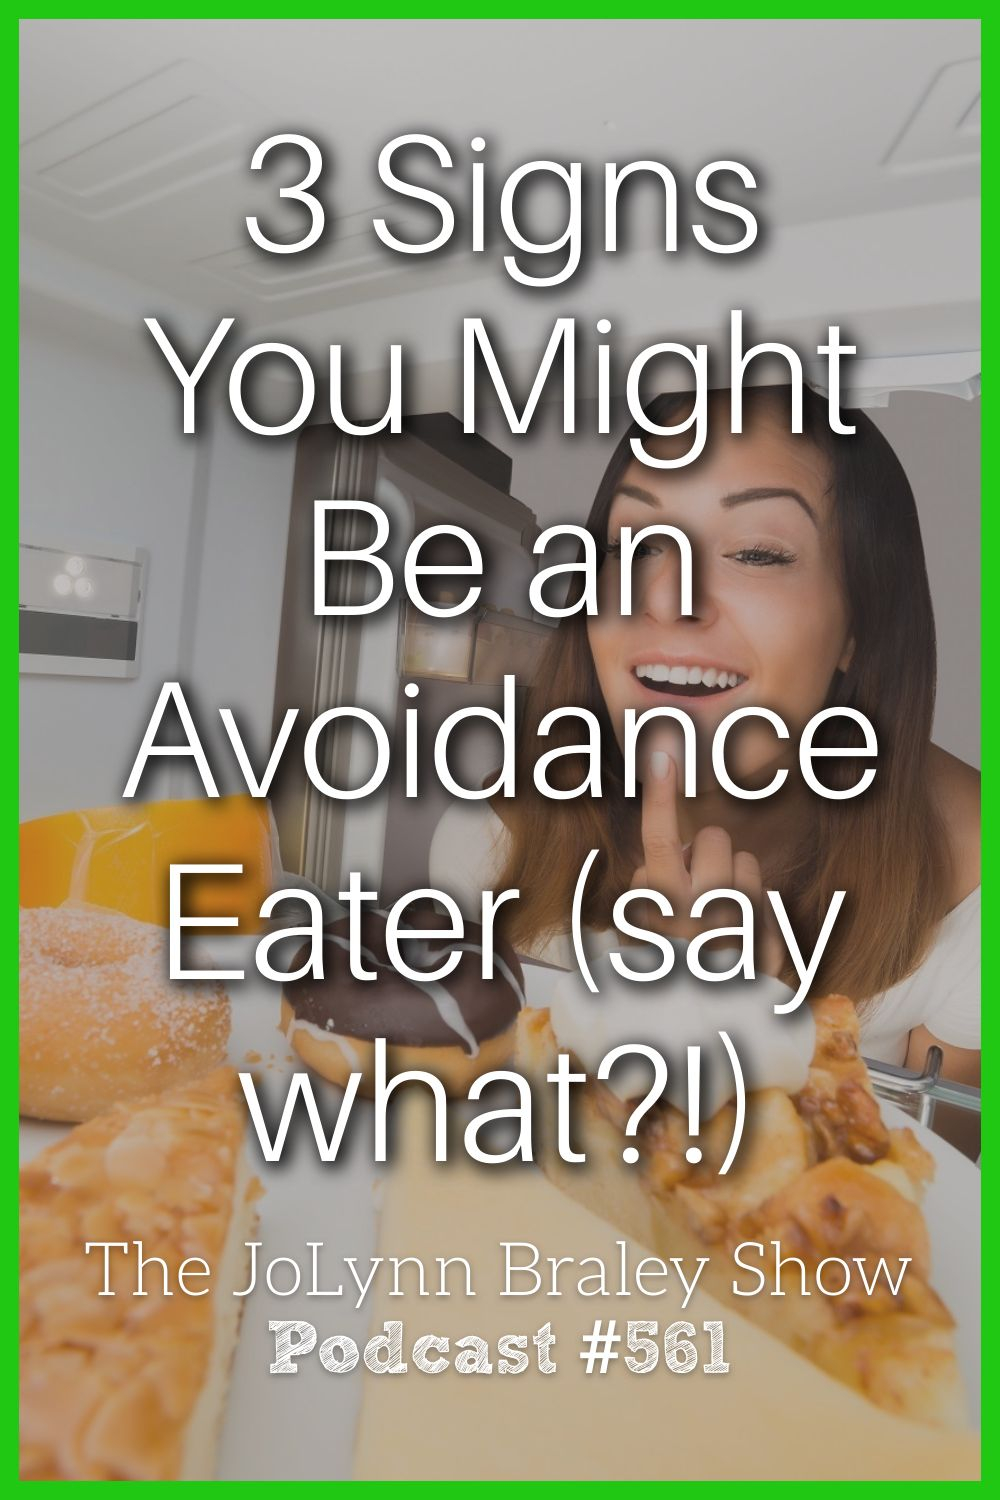 3 Signs You\'re an Avoidance Eater (say what?!) [Podcast #561]